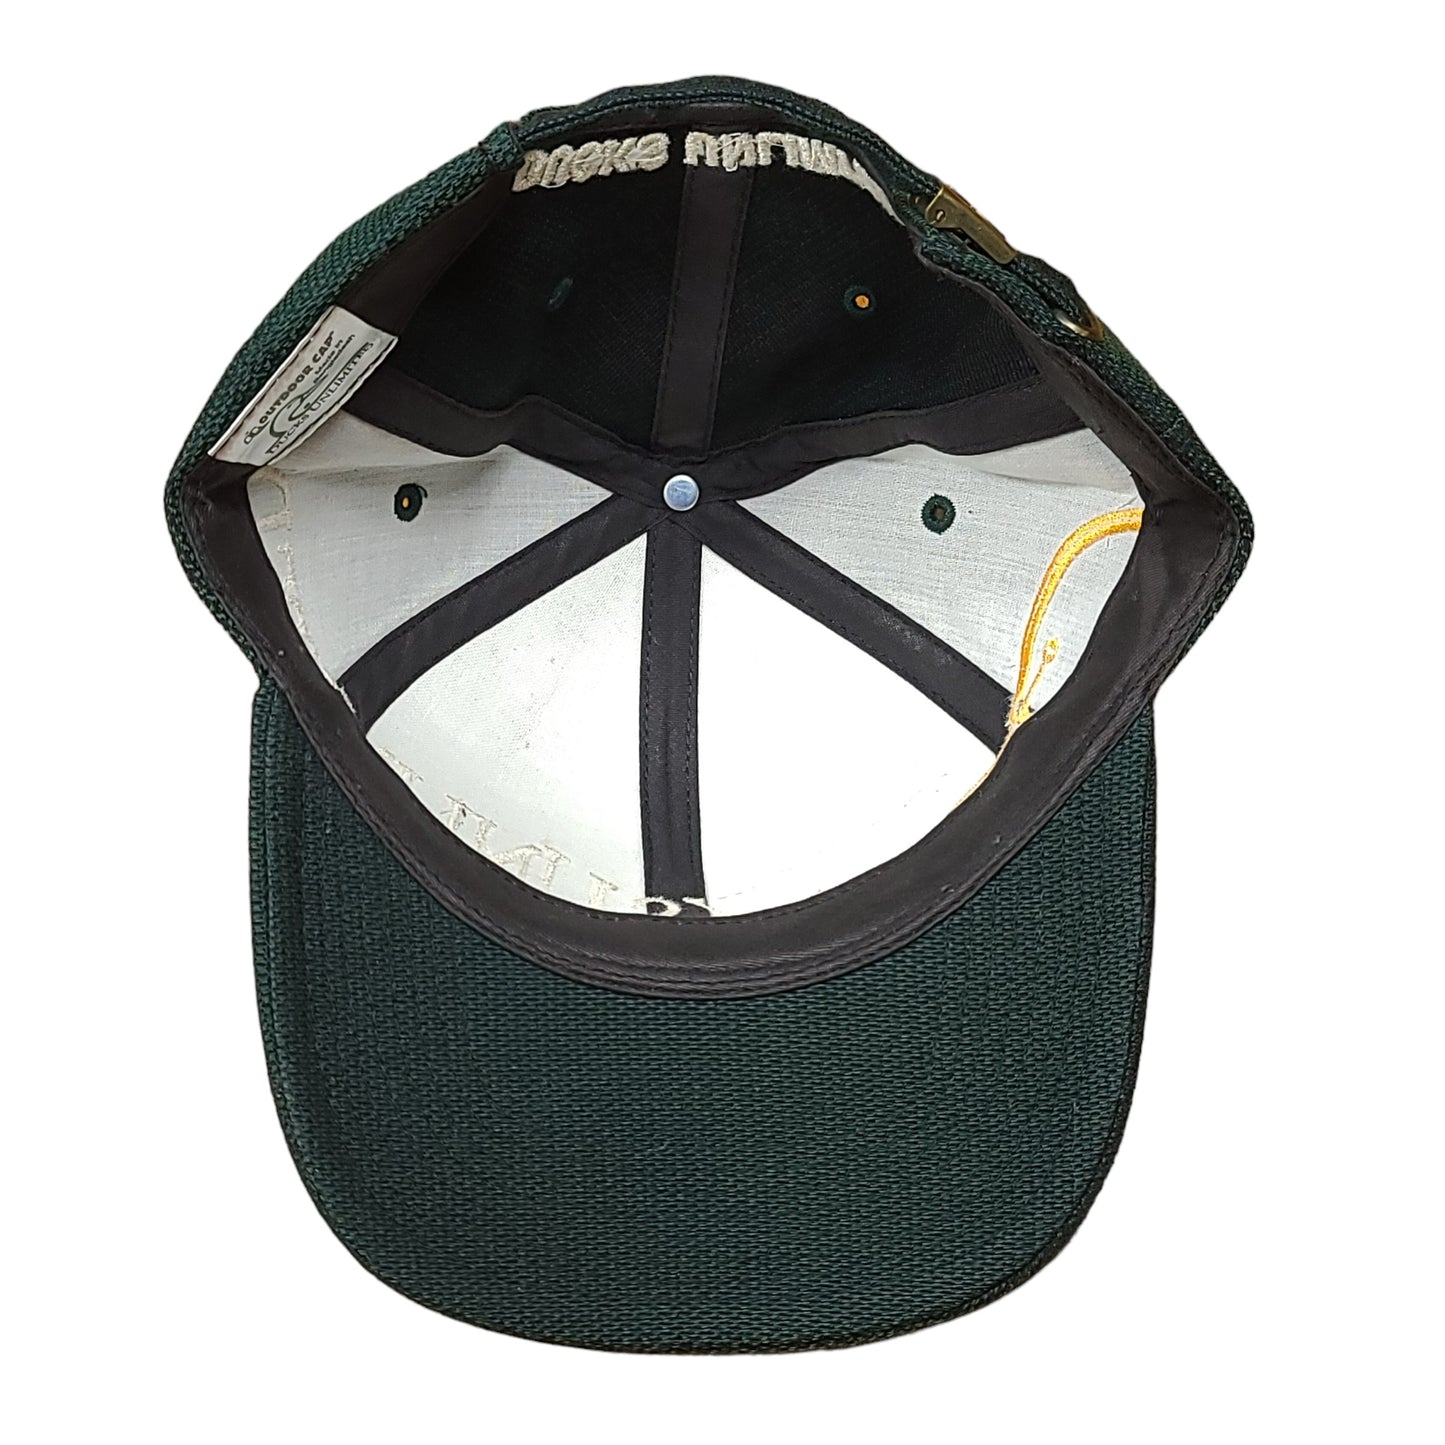 Ducks Unlimited Green Strap Back Hunting Hat